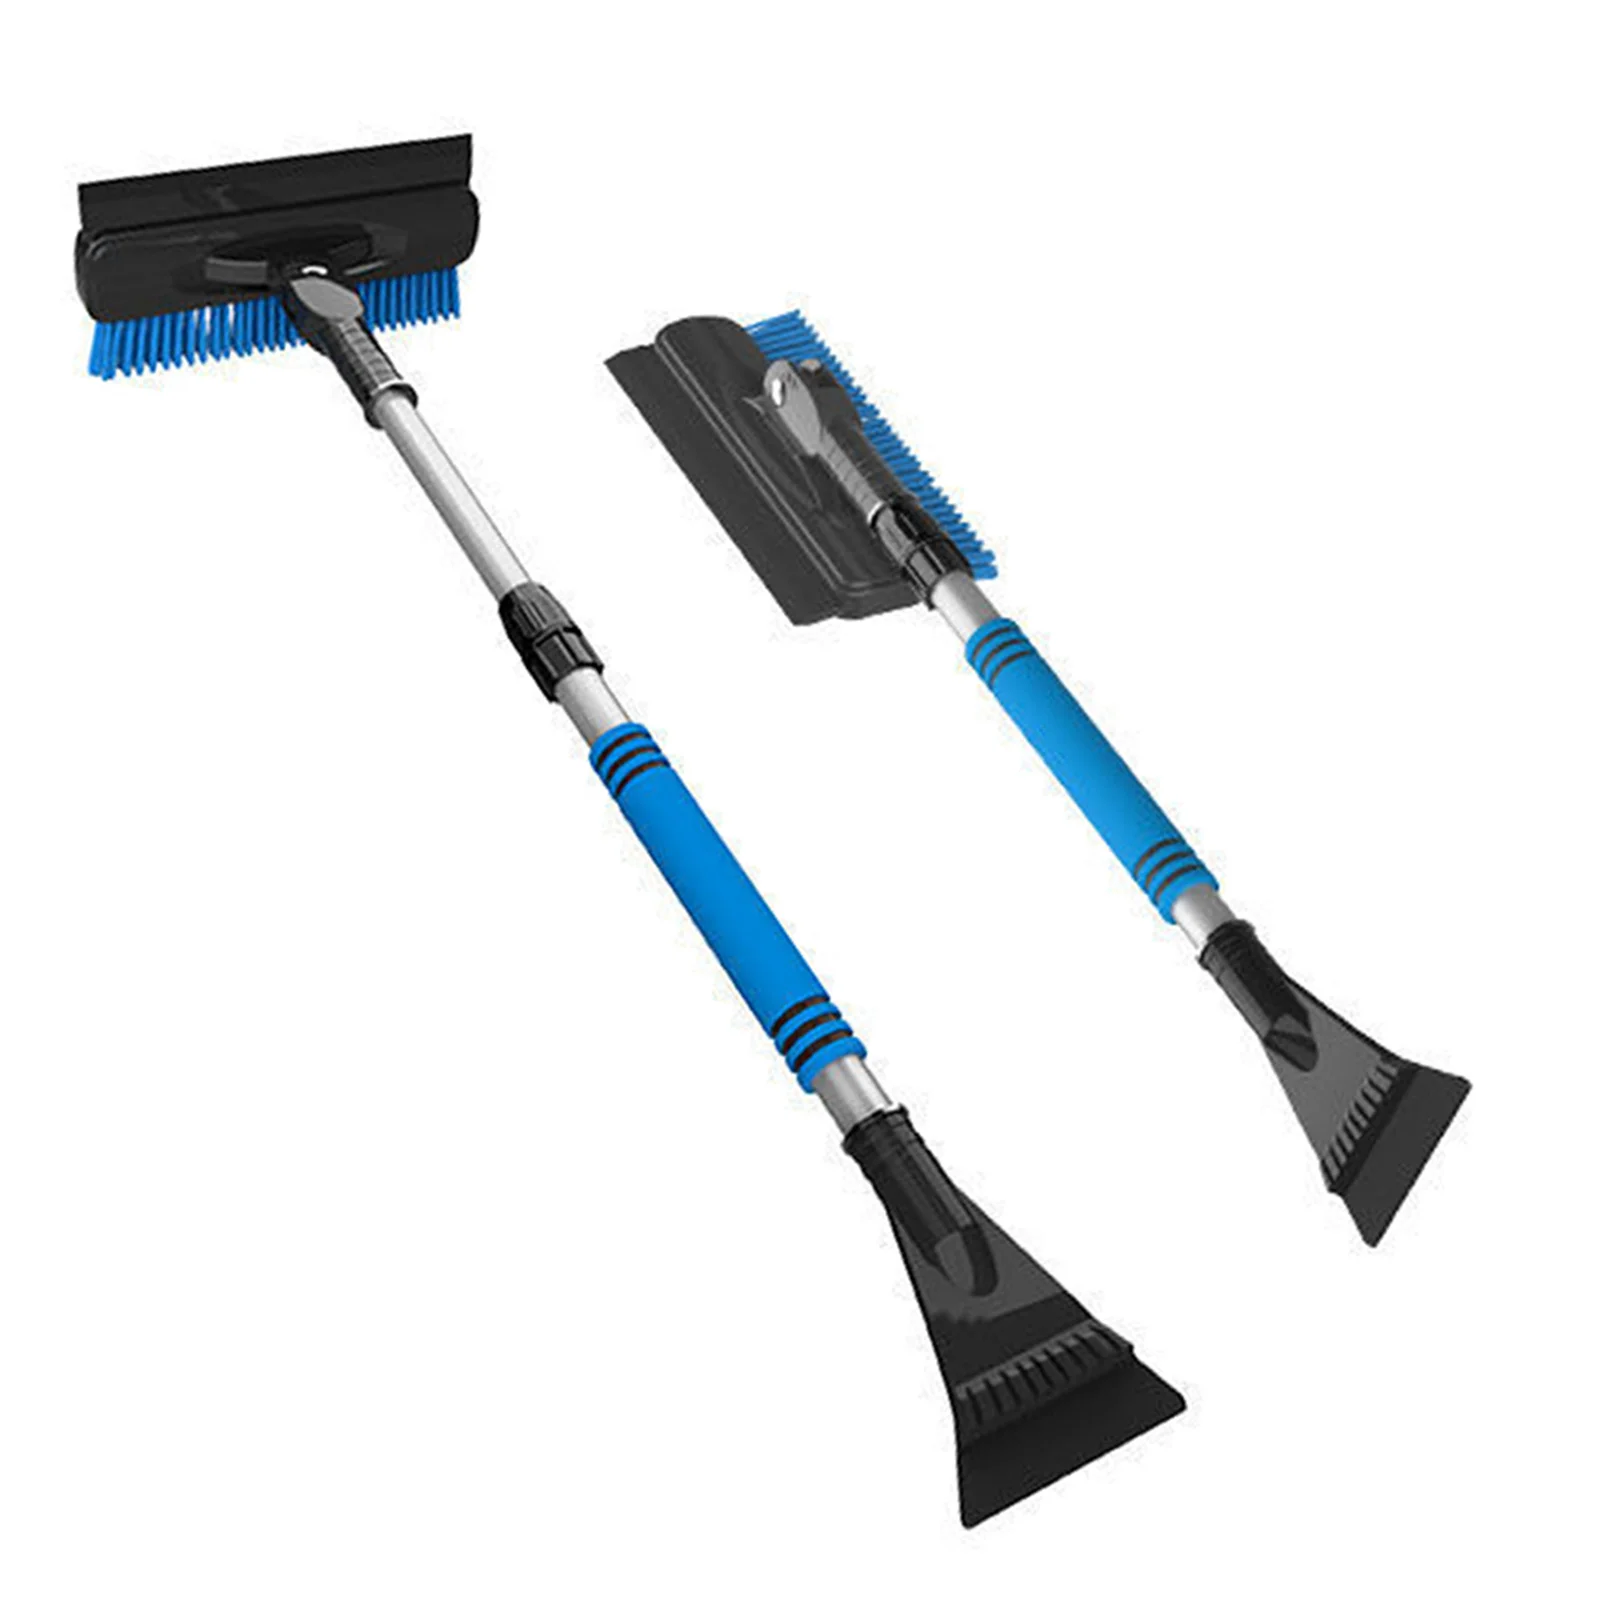 Truck Cold-resistant Abs Soft Bristles Car Snow Brush Removable and Easy Storage Suv Windshield Wiper Deicing Shovel and Snow Brush 2-in-1 